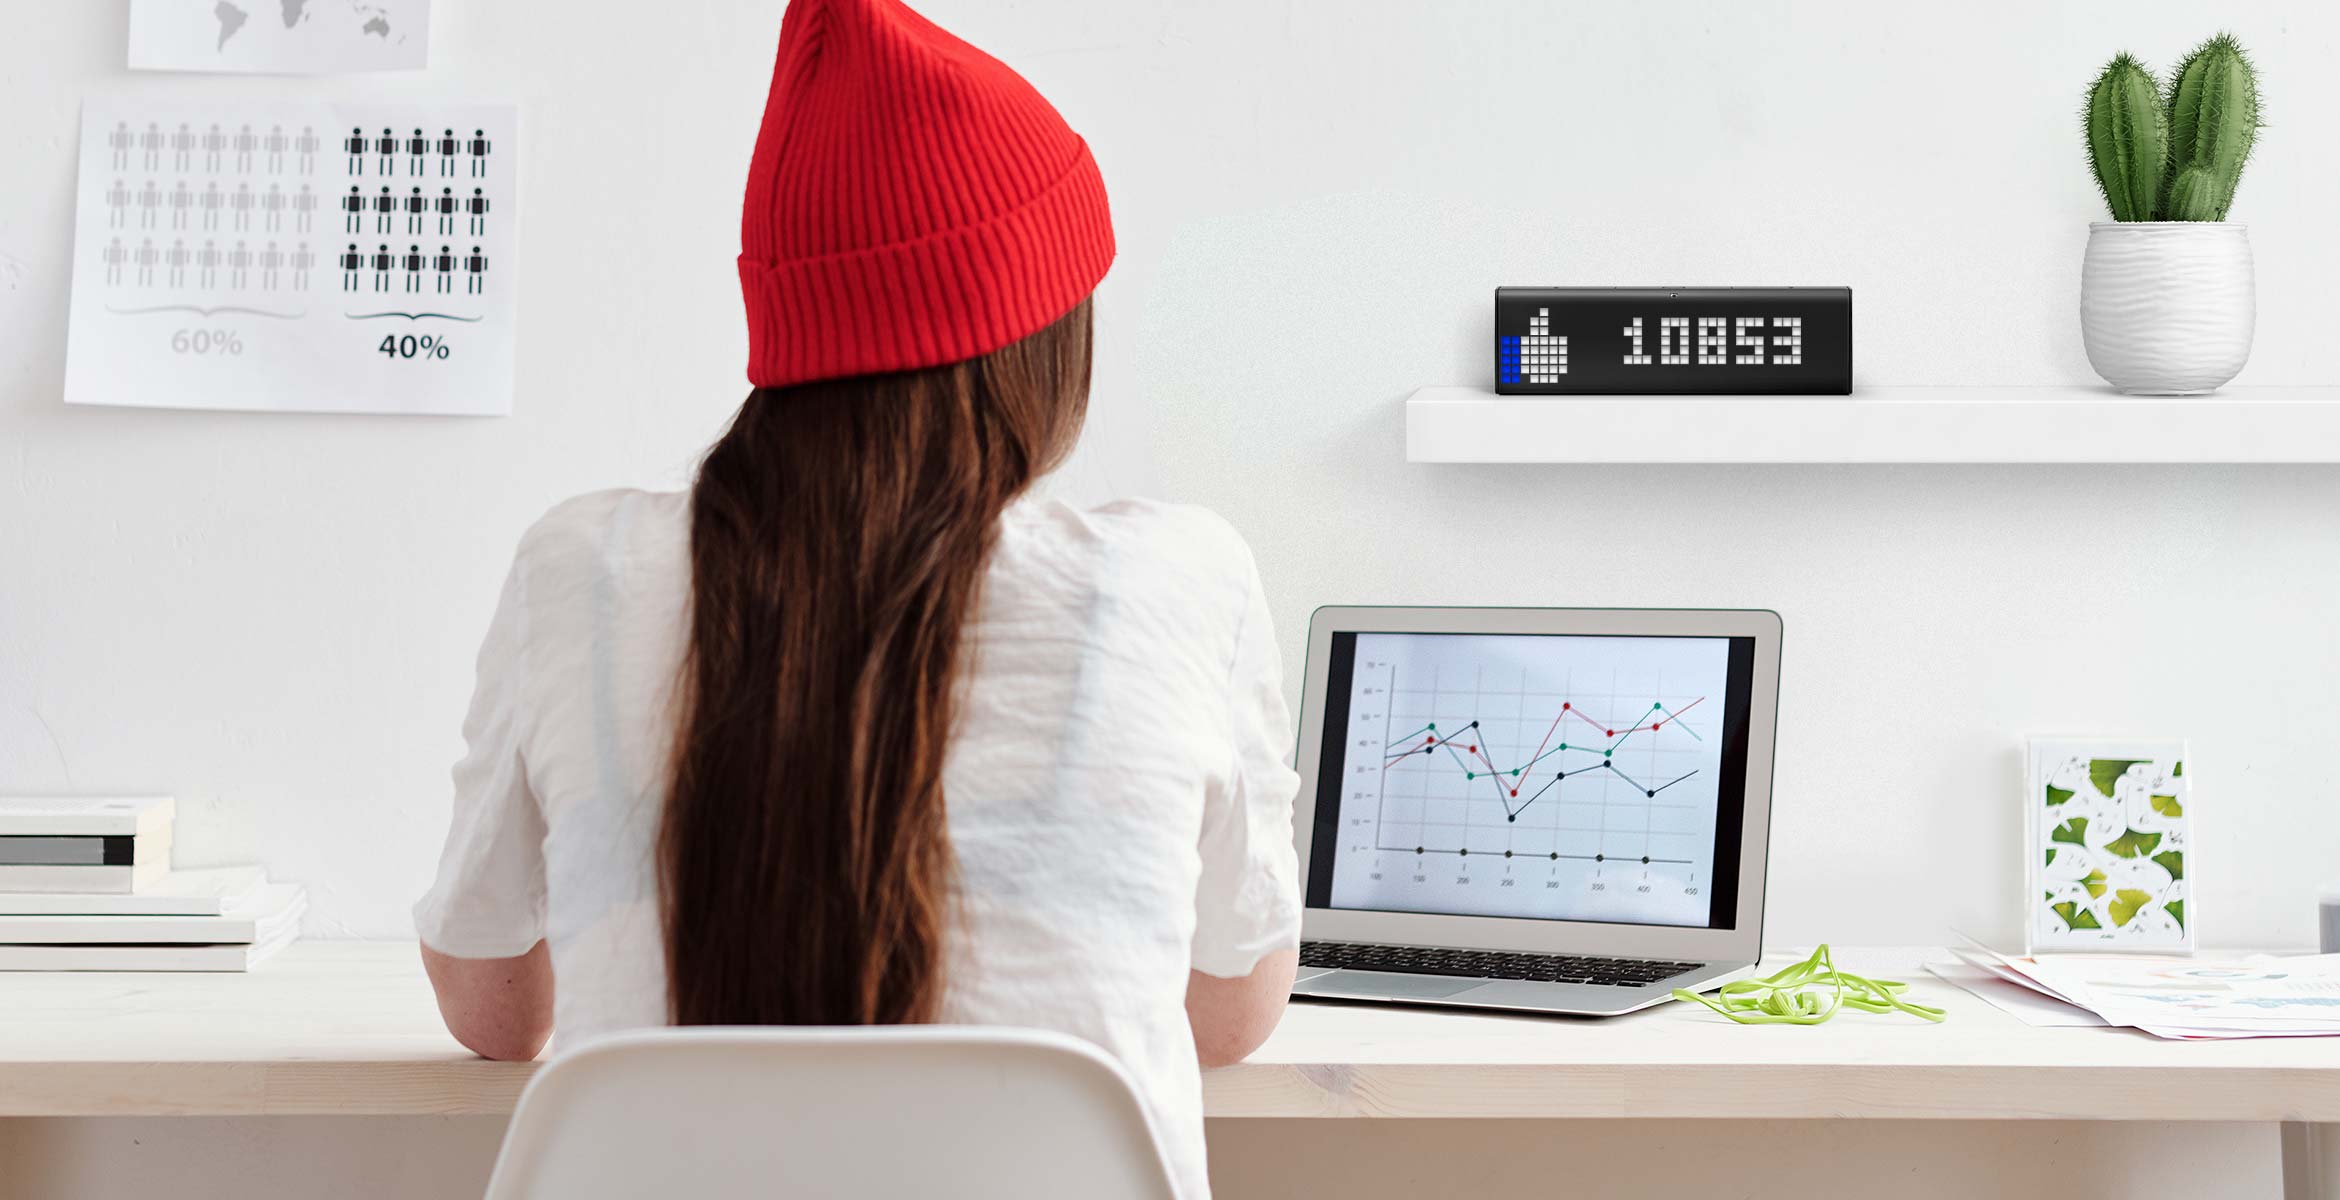 LaMetric Time smart clock complements the desk setup and displays Facebook like counter